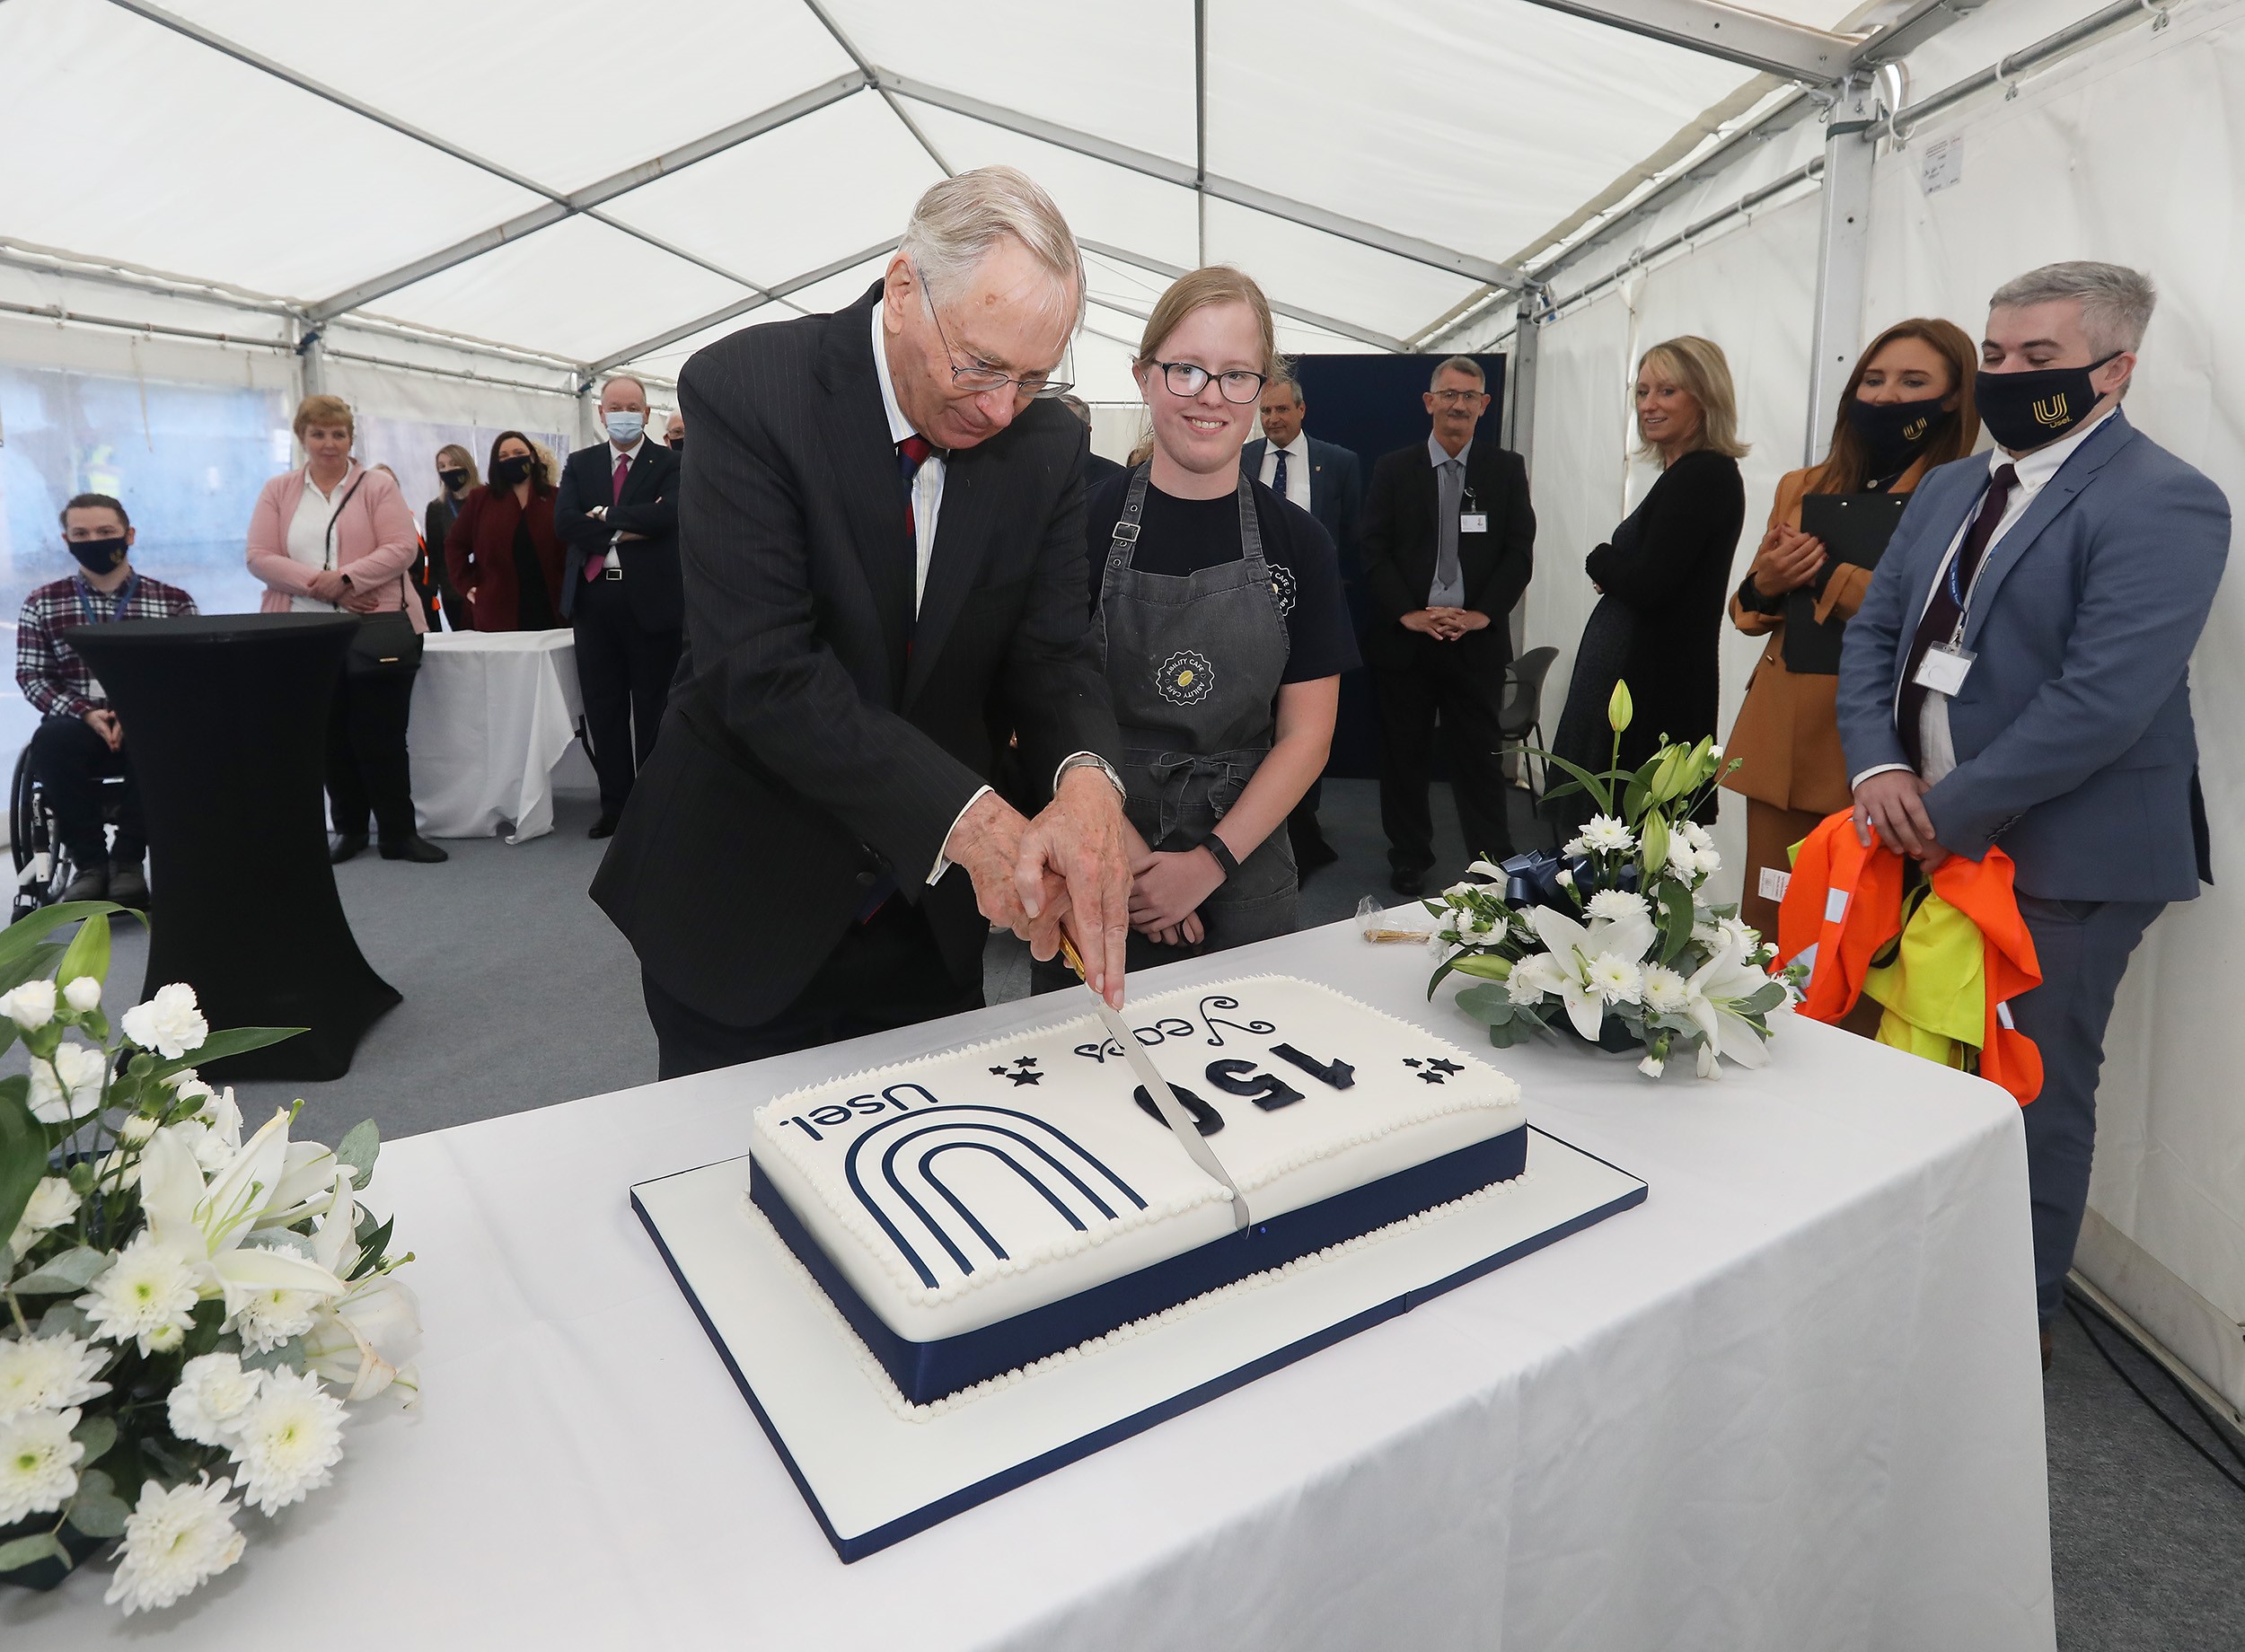 The Duke of Gloucester visits Usel to commemorate 150th anniversary